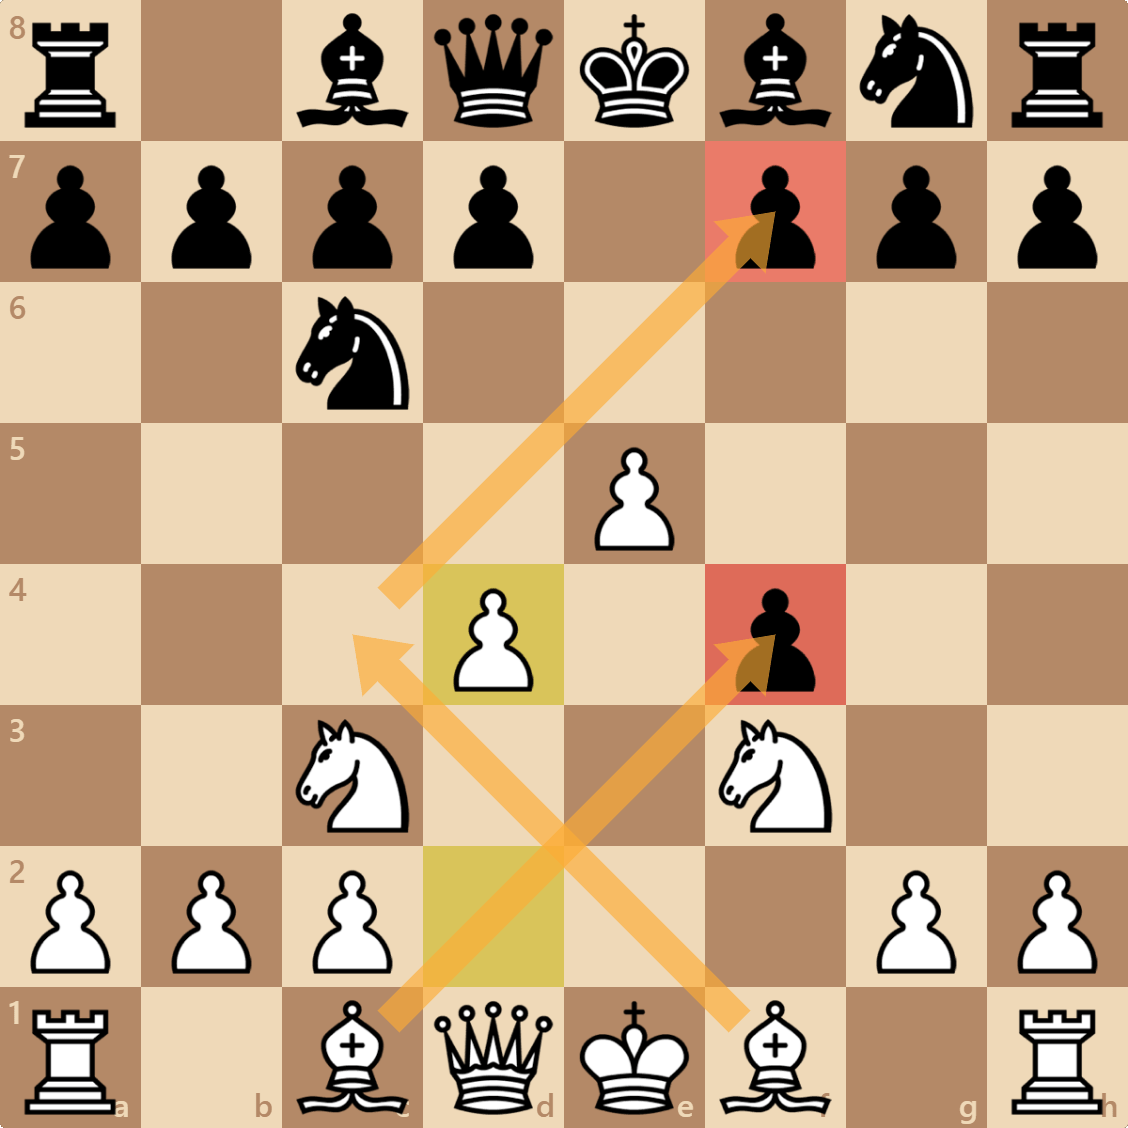 Is the Vienna and Vienna gambit considered dubious at master level? : r/ chess